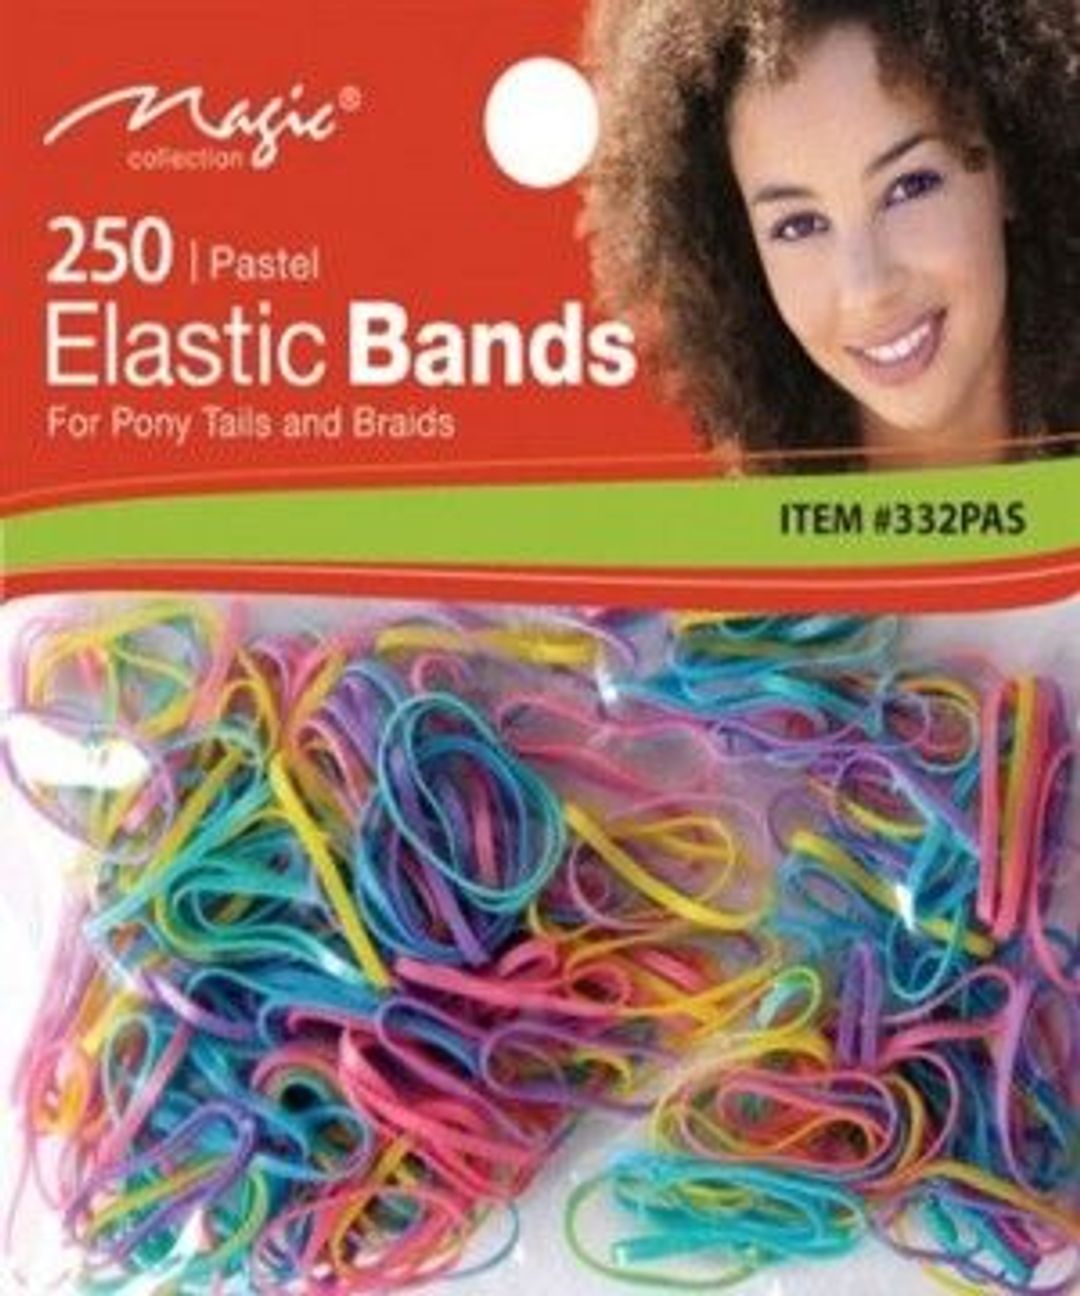 Magic Collection 250 Elastic Bands Assorted - 332 - Assorted Colors